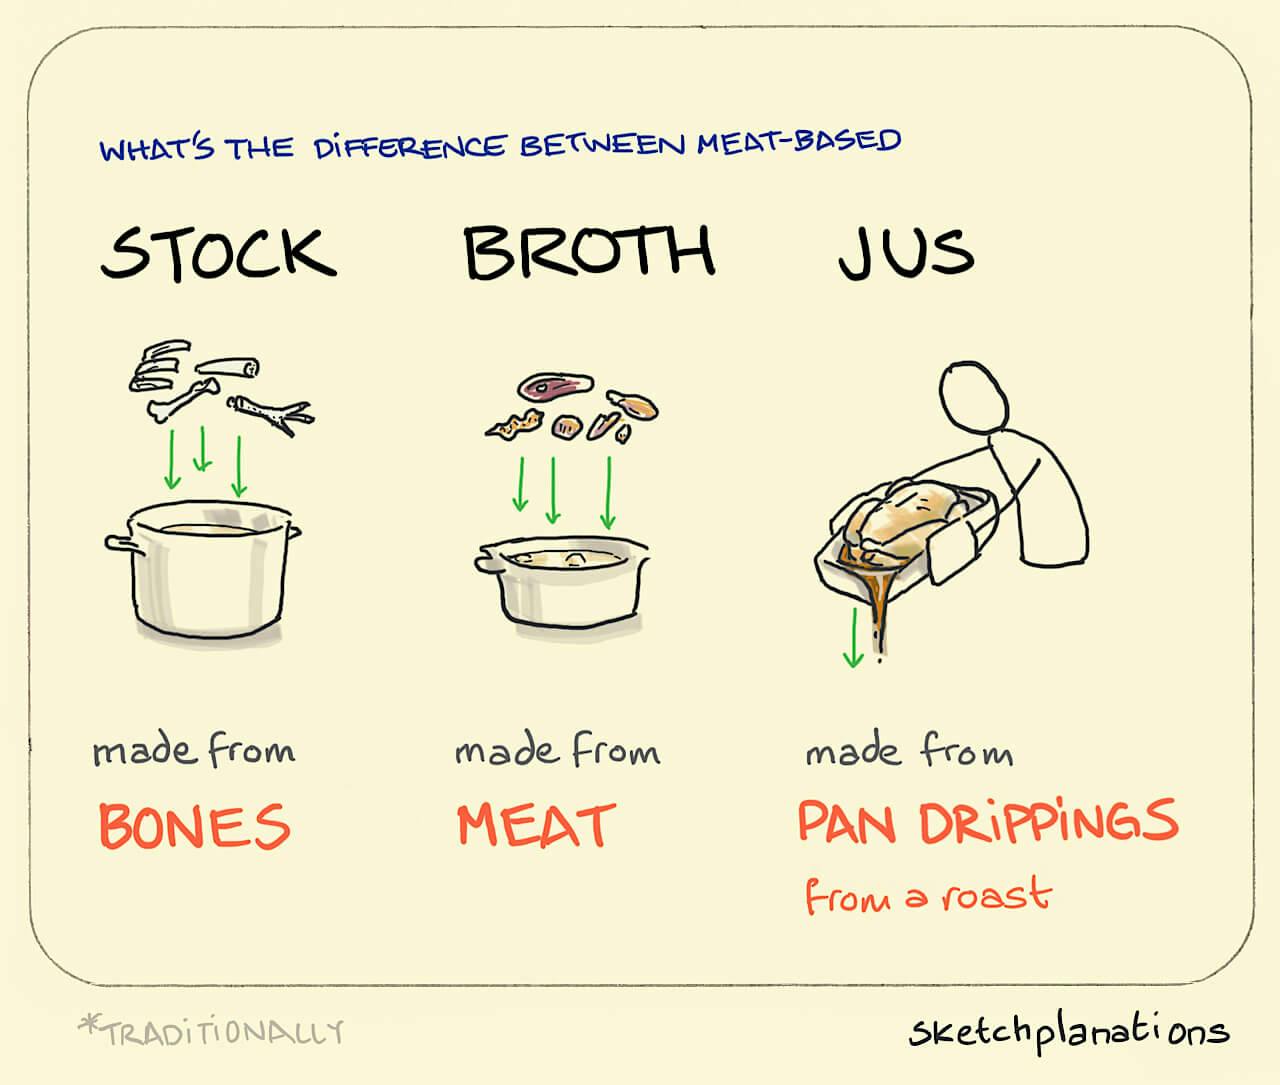 Stock, Broth, Jus illustration: a large cooking pot of water has bones thrown in to make Stock. A second pot has meat added to water to make Broth. The cooking tray used to roast a chicken is tipped up to pour out the Jus, made from pan drippings. 